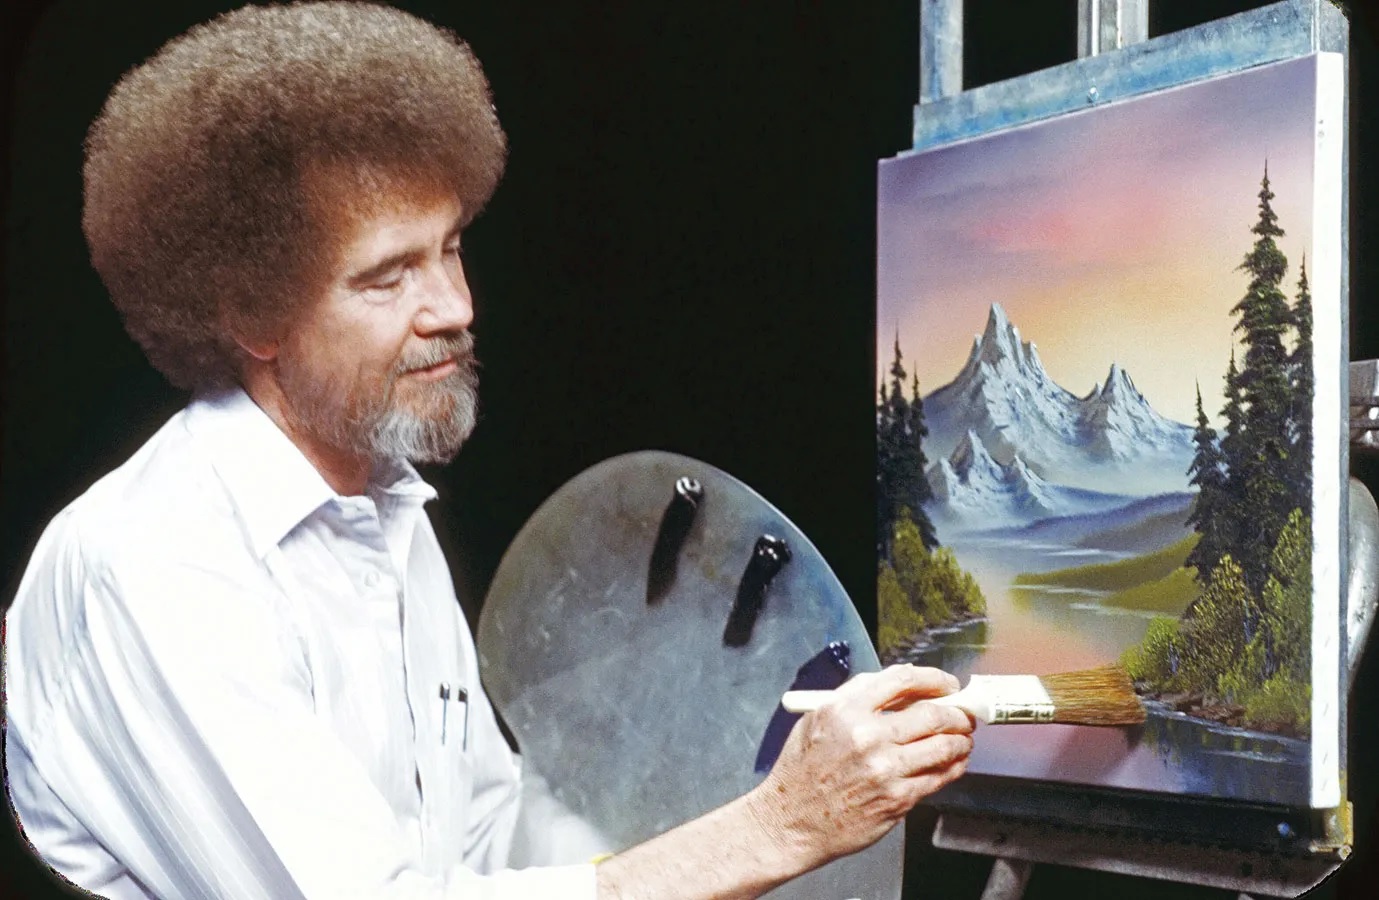 Bob Ross, in full Robert Norman Ross, (born October 29, 1942, Daytona Beach, Florida, U.S.—died July 4, 1995, New Smyrna Beach, Florida), American painter and television personality whose popular PBS television show The Joy of Painting (1983–94) made him a household name as the painting teacher to the masses.